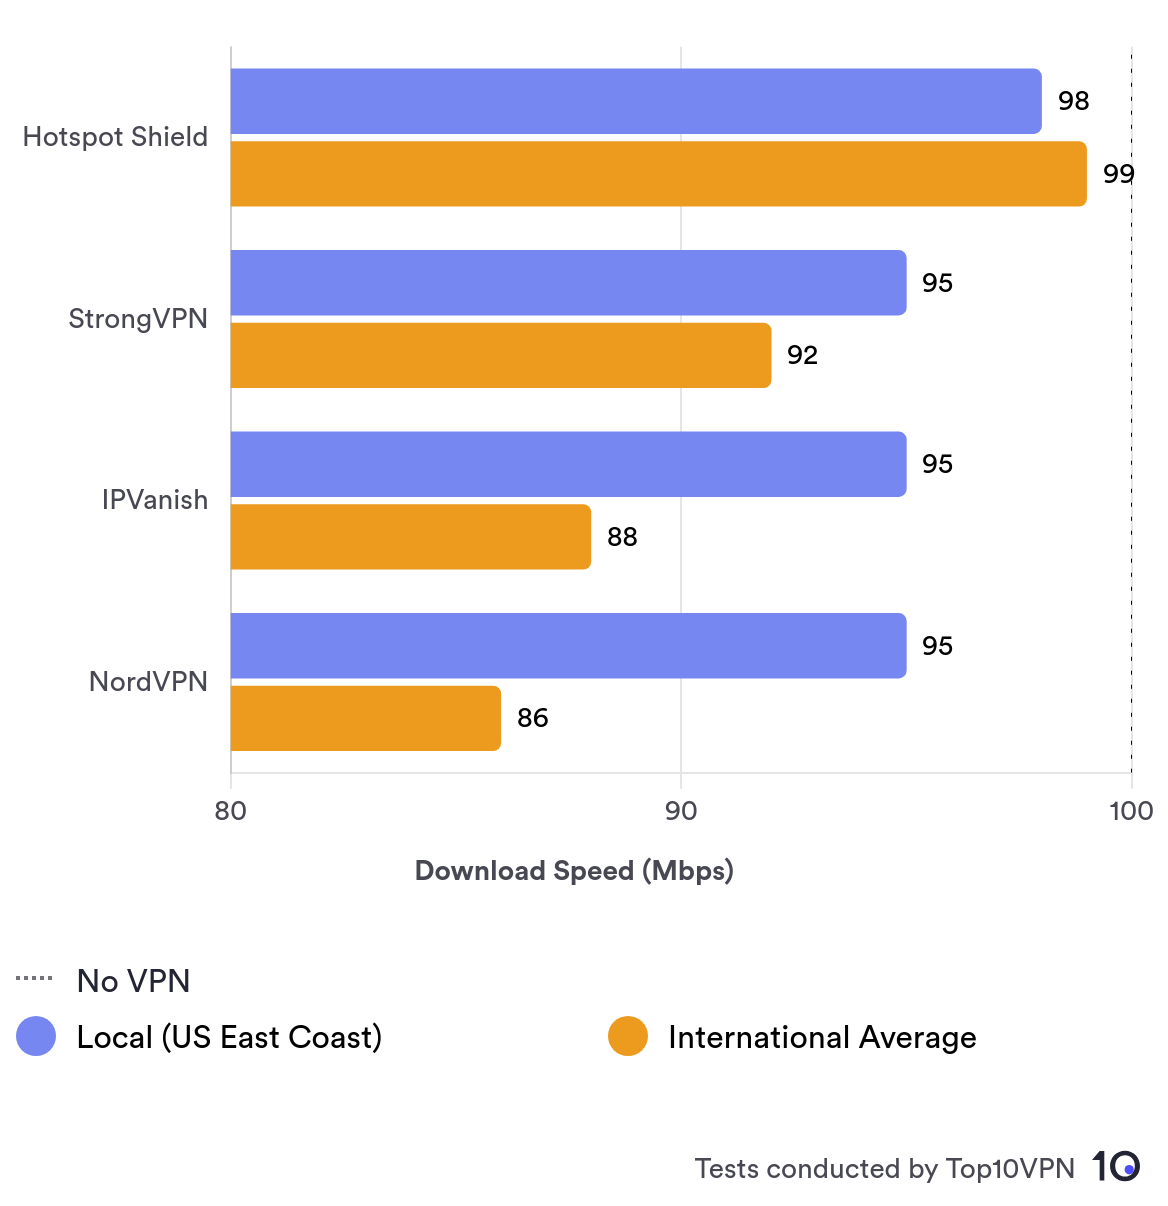 Bar chart comparing recorded local and international speeds with Hotspot shield, StrongVPN, IPVanish, and NordVPN. 